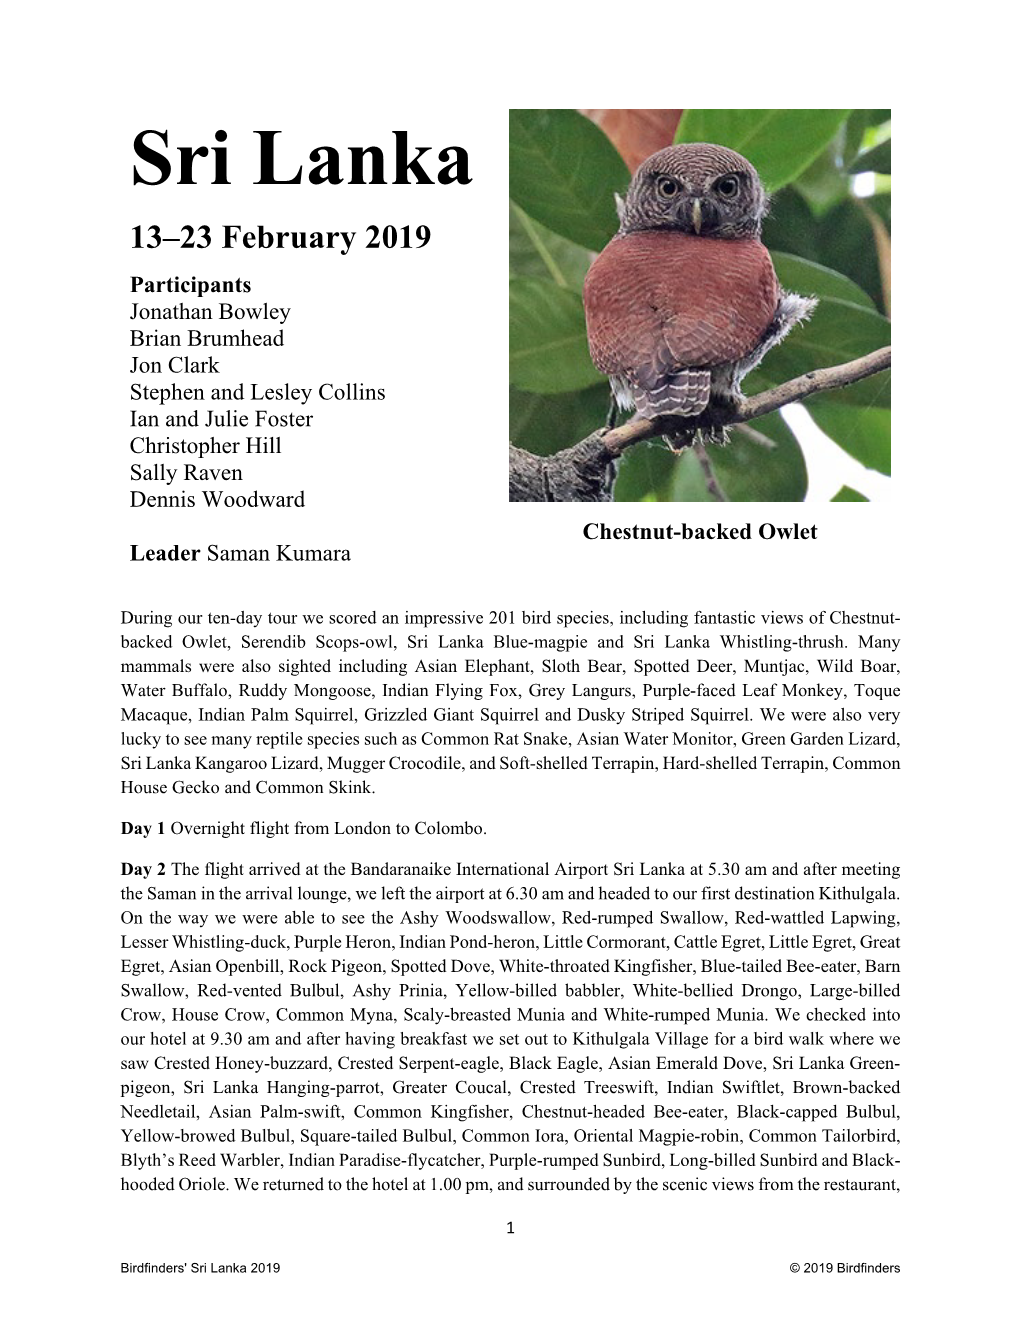 Sri Lanka 2019 © 2019 Birdfinders We Had Our Lunch